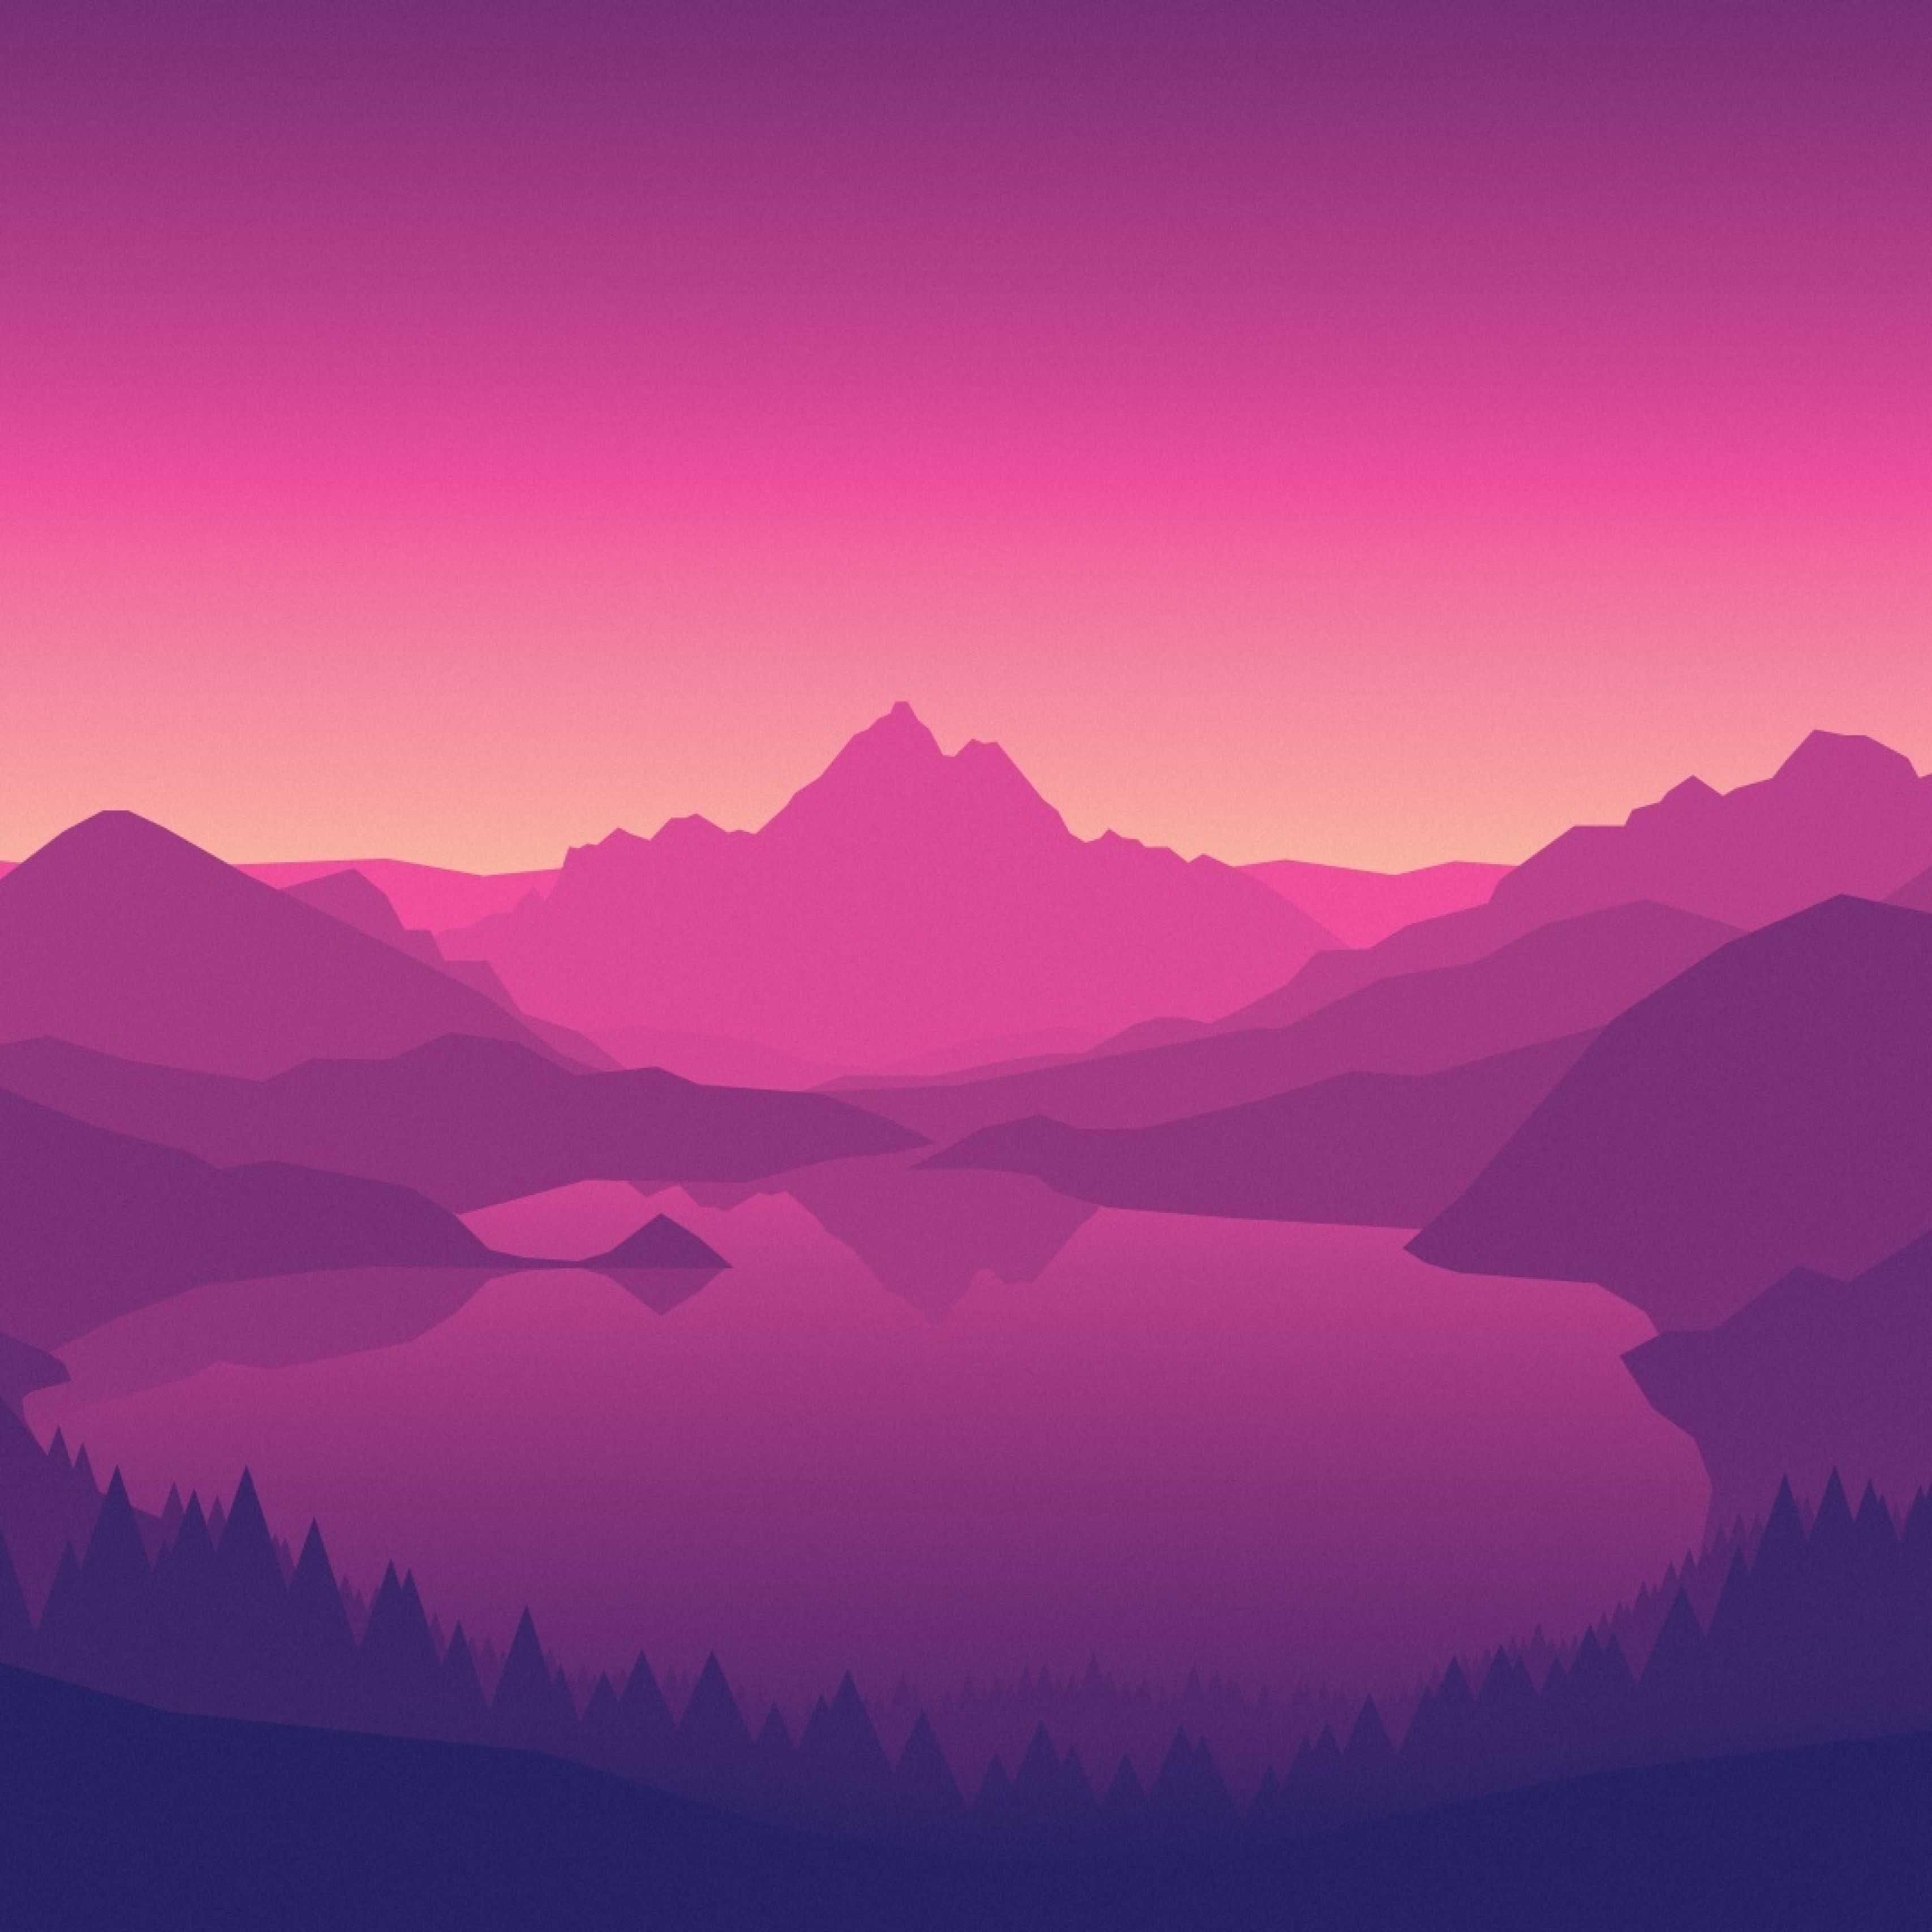 Download Firewatch Video Games Mountains iPad Pro 12.9 inches Retina wallpaper 3415x3415